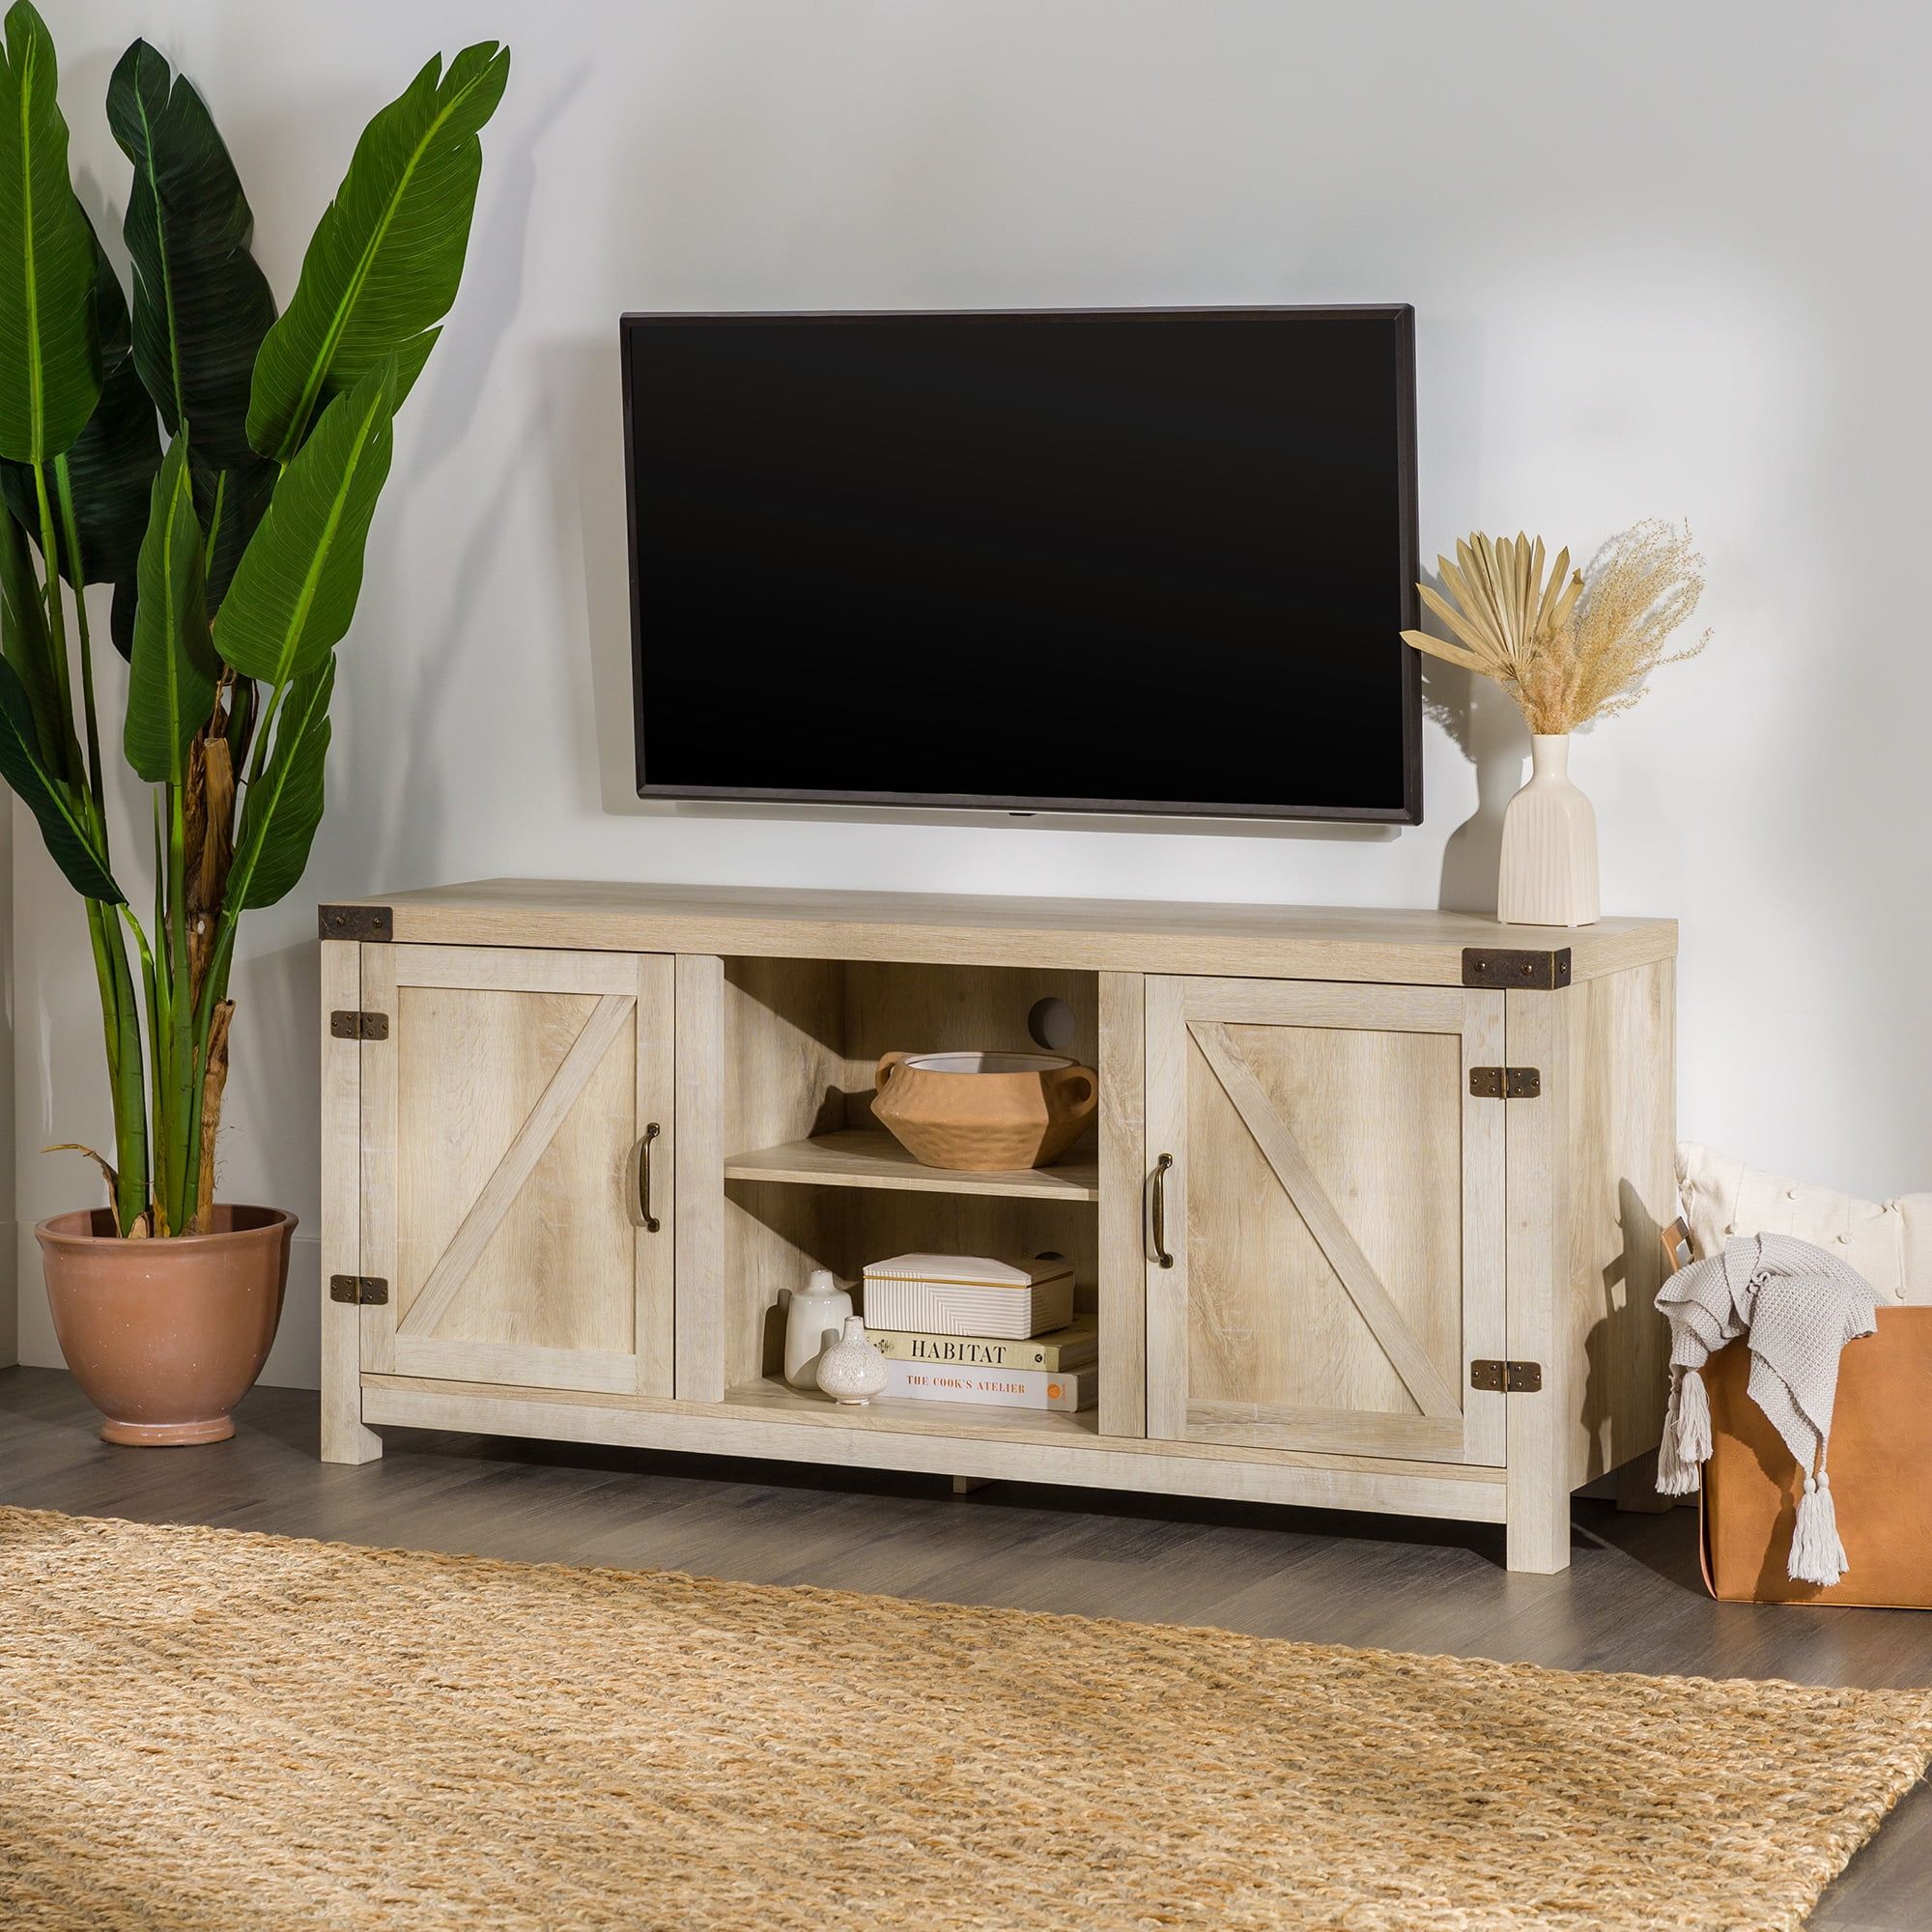 Woven Paths Modern Farmhouse Barn Door Tv Stand For Tvs Up To 65", White  Oak – Walmart For Modern Farmhouse Barn Tv Stands (View 3 of 15)